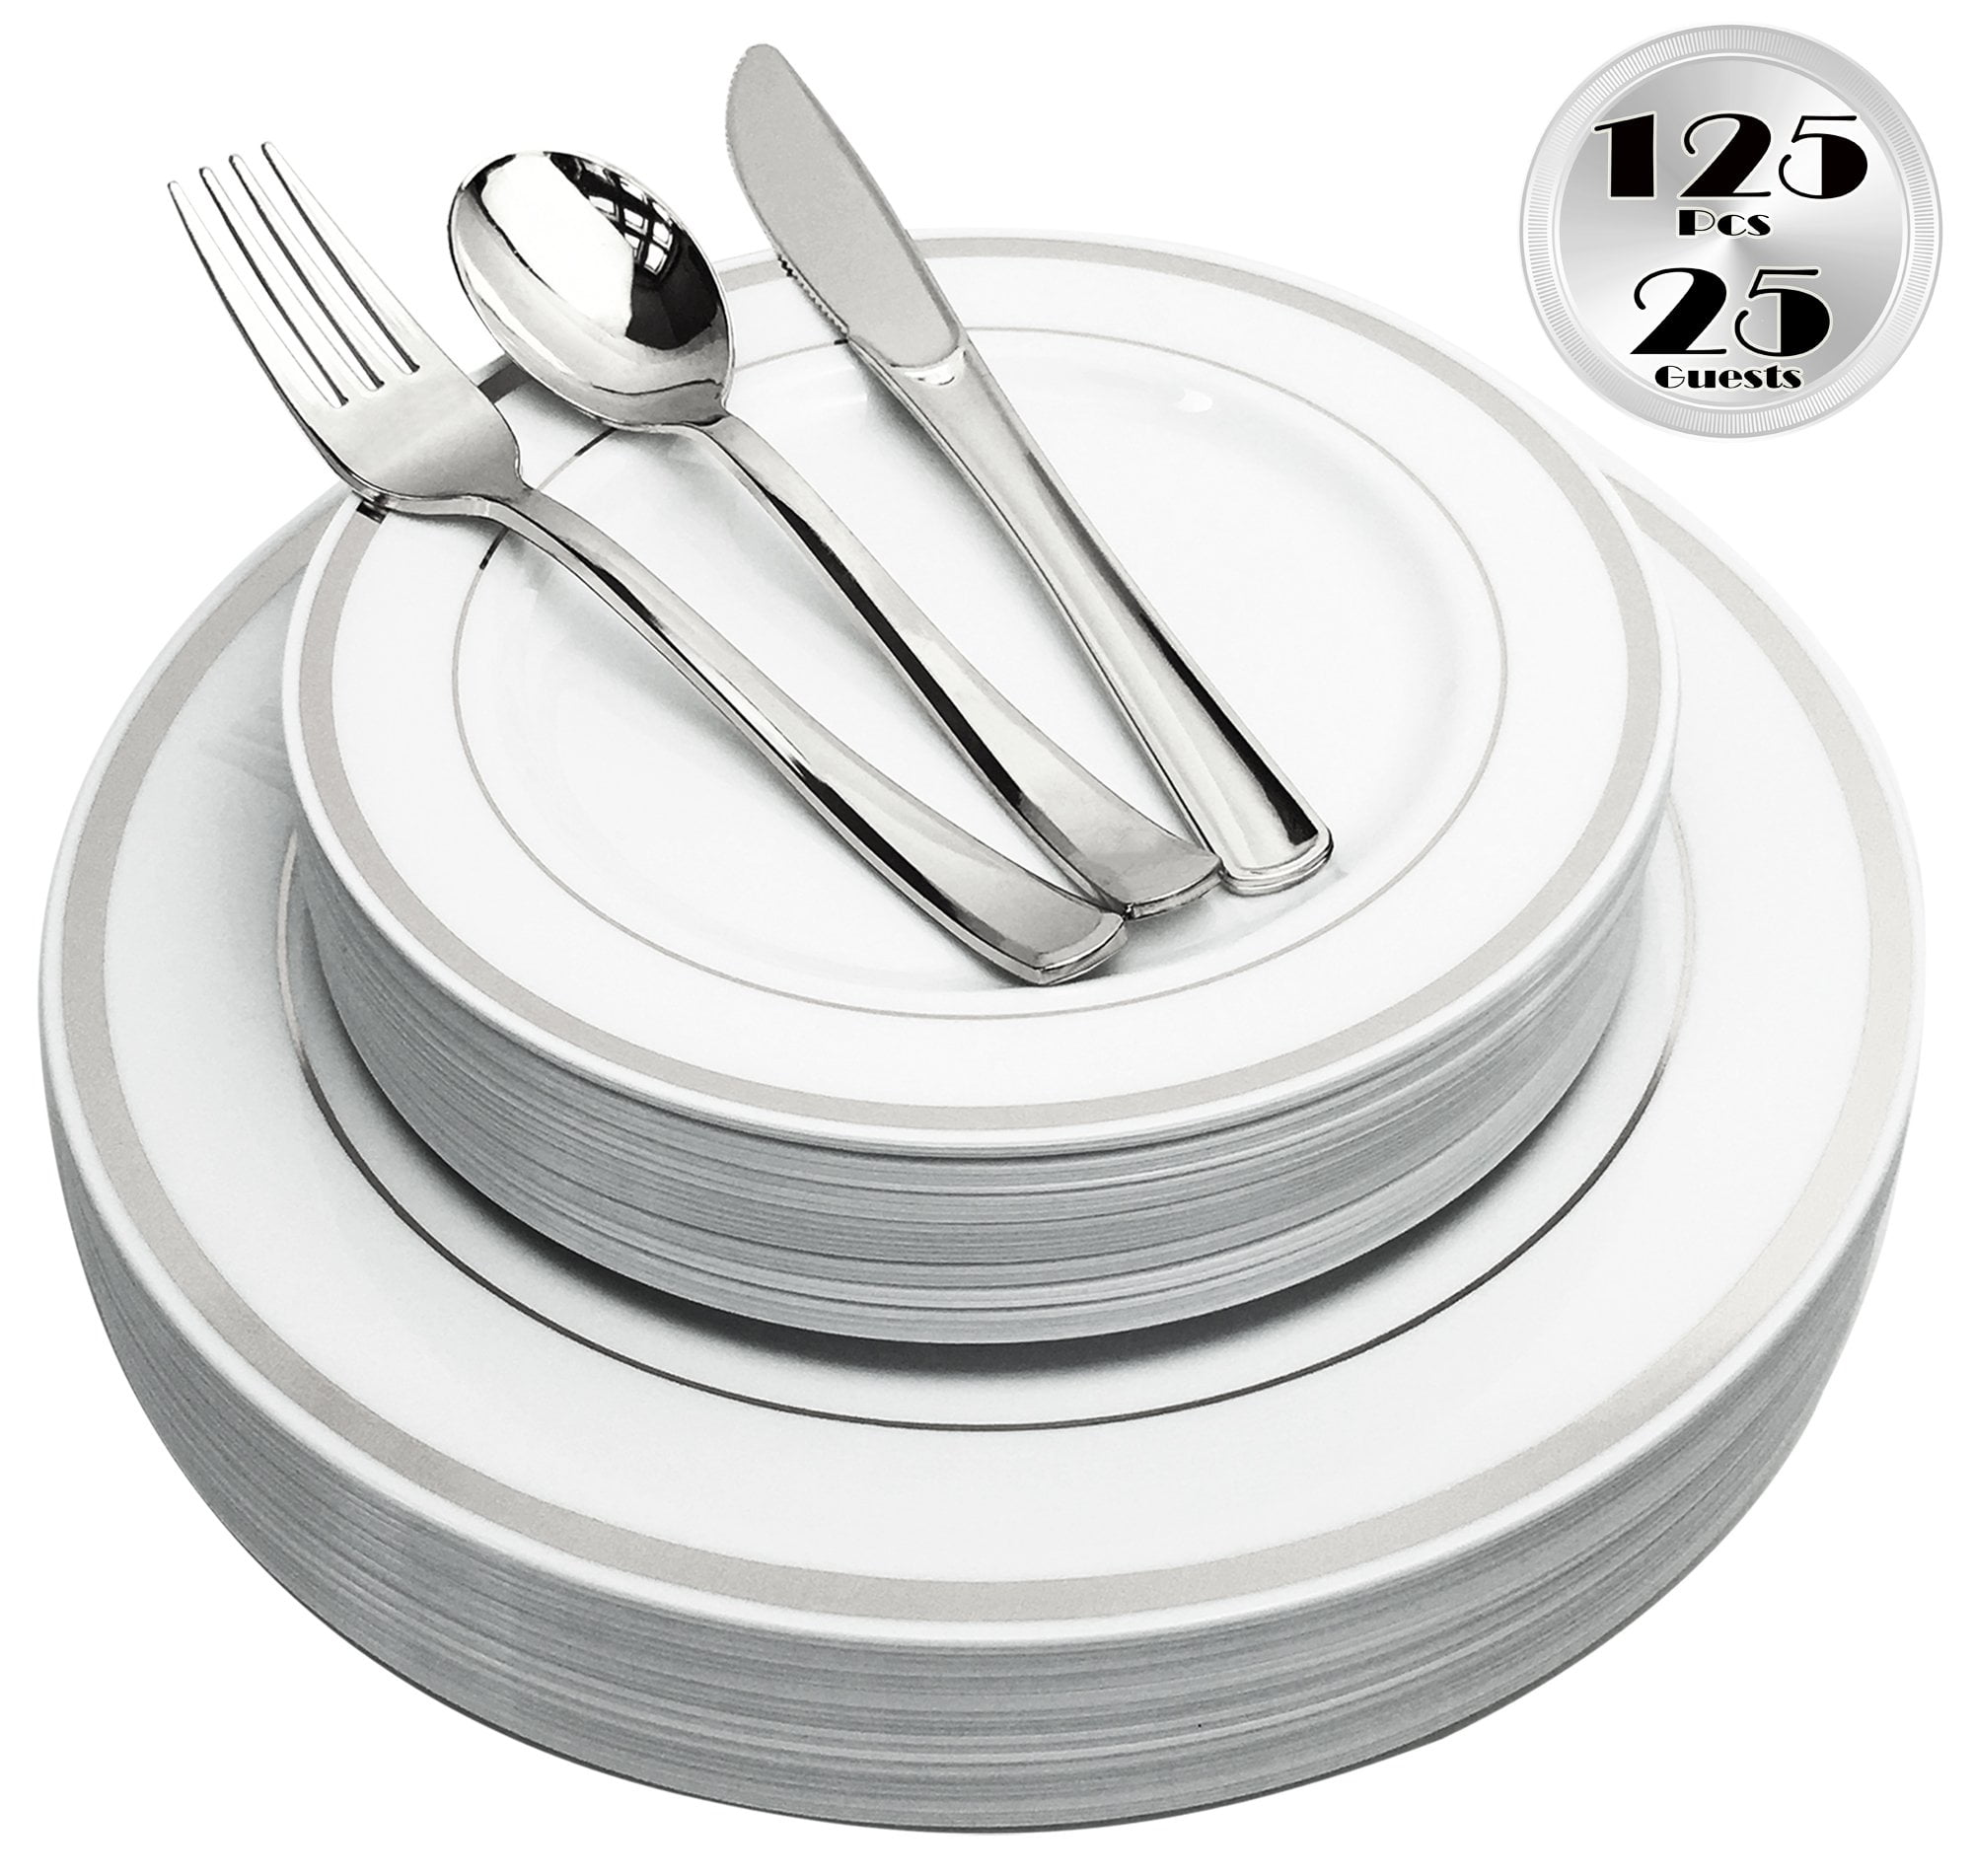 Disposable Sliver Plastic Cutlery Set 25 Cutlery Includes: 25 Dinner Plates WELLIFE 125PCS Black Plastic Plates Silver Lace Design Plates Suitable for Wedding and Party 25 Dessert Plates 